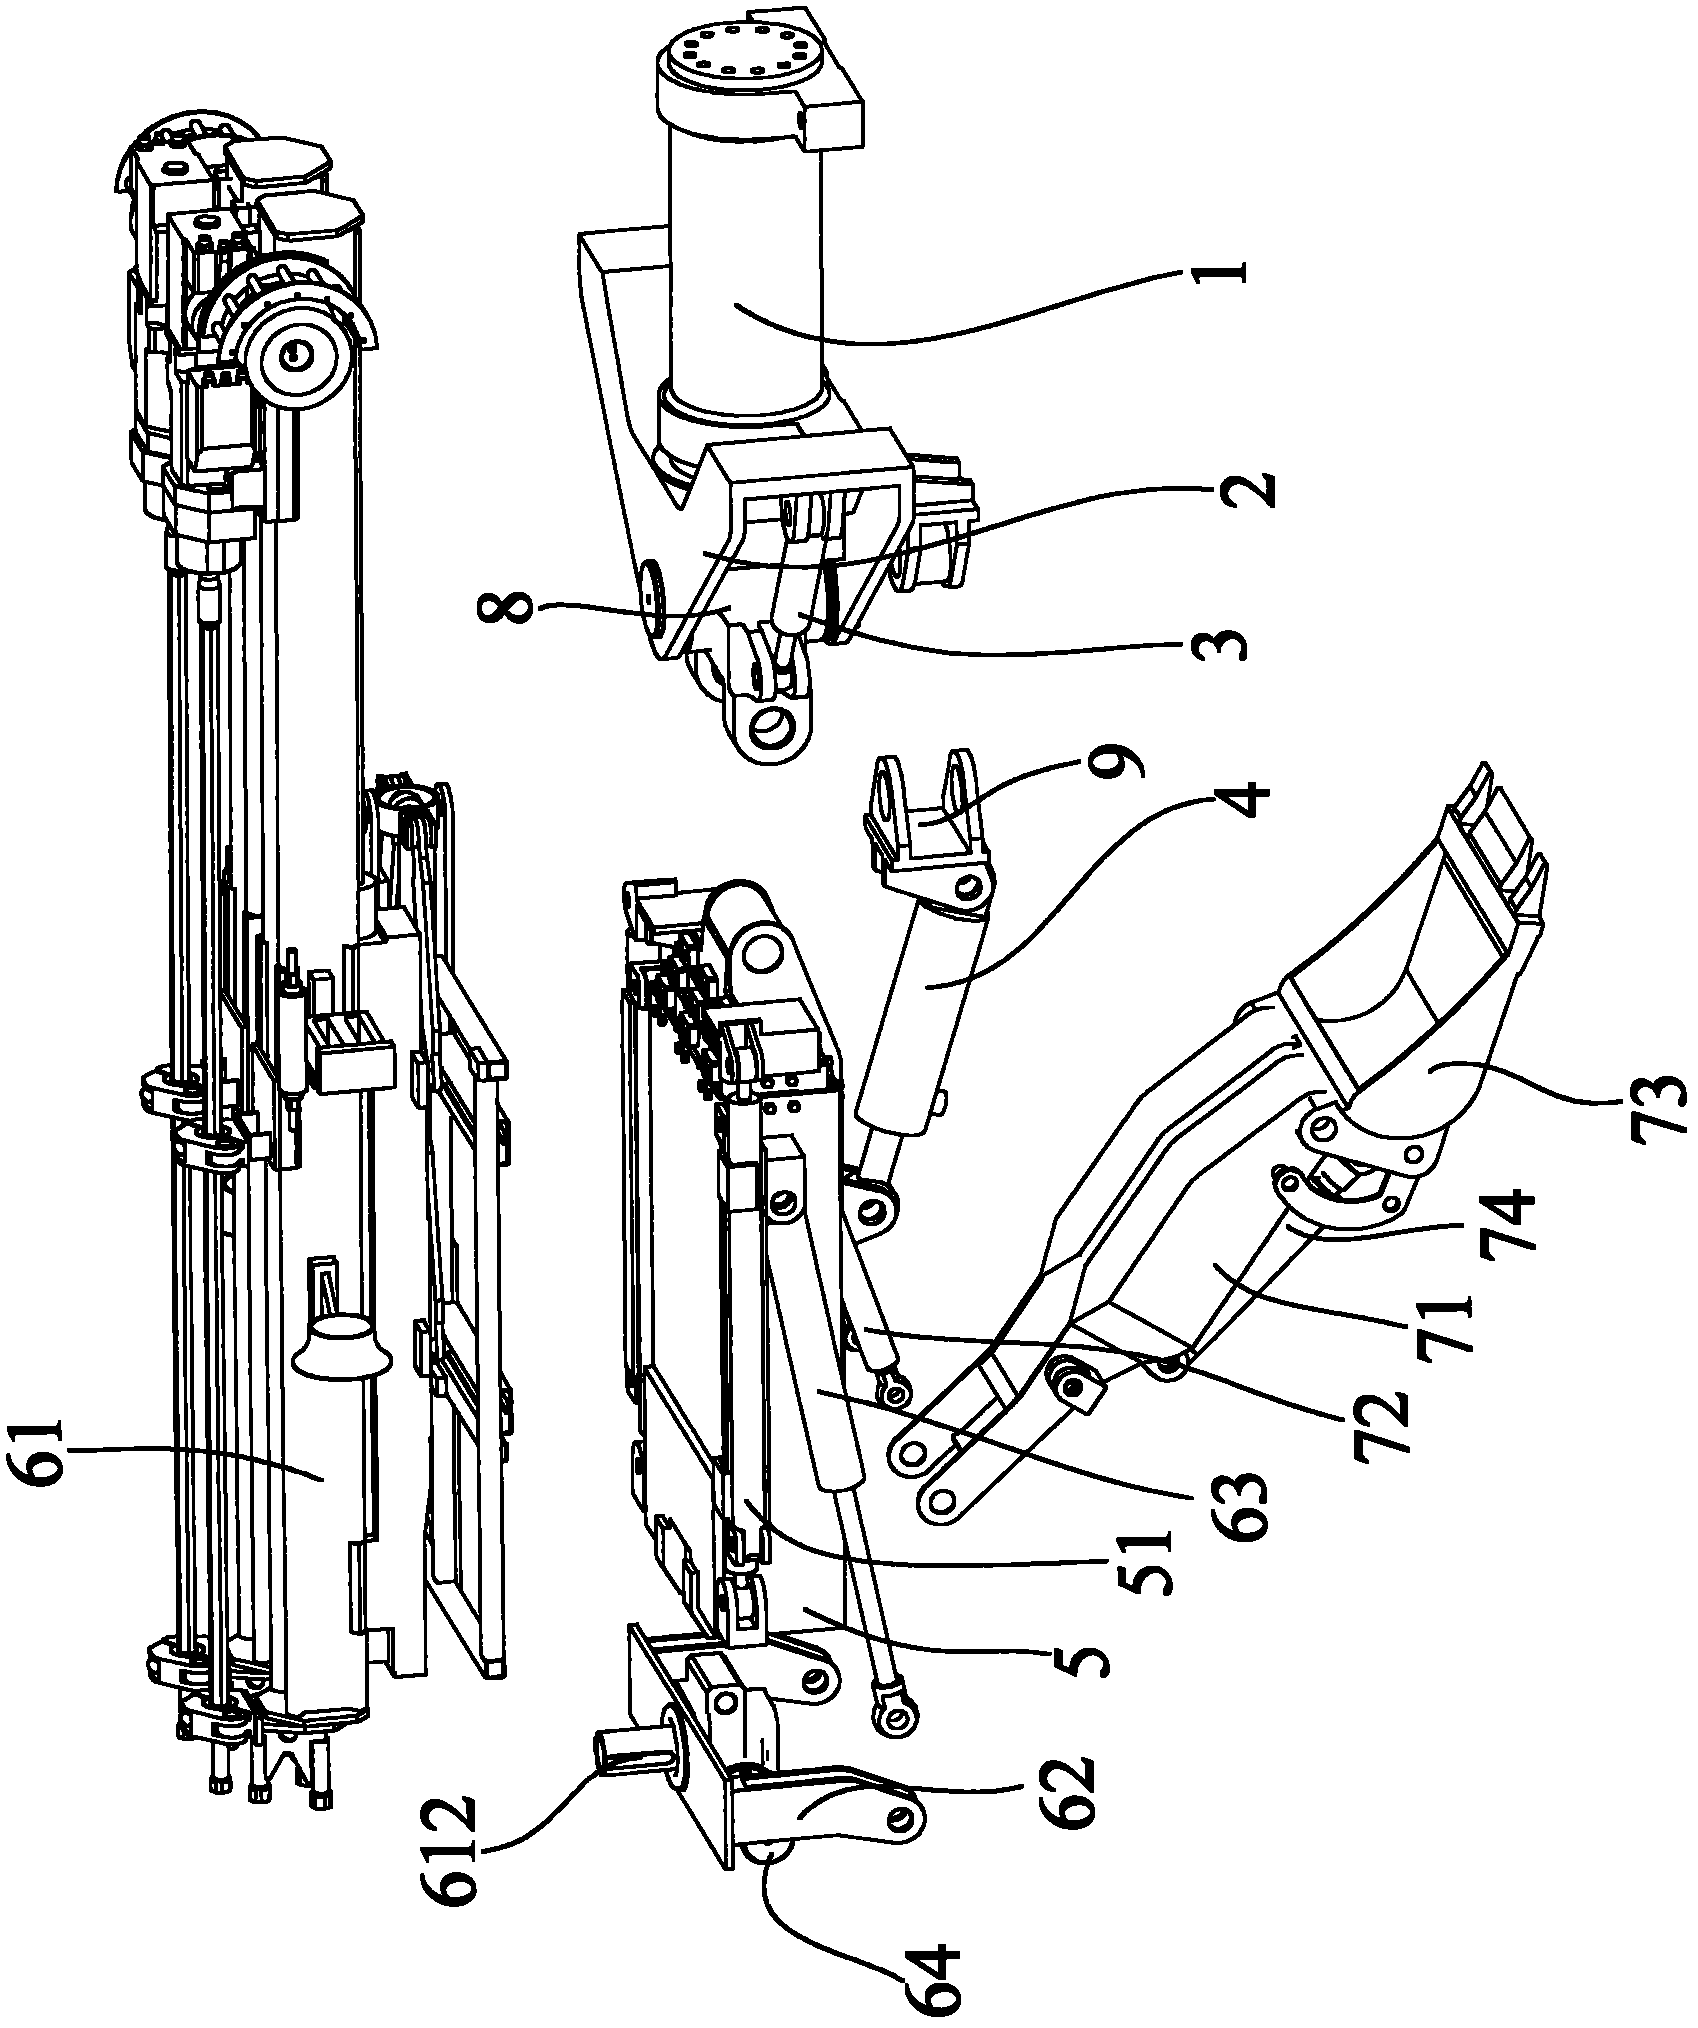 Drill loader working device